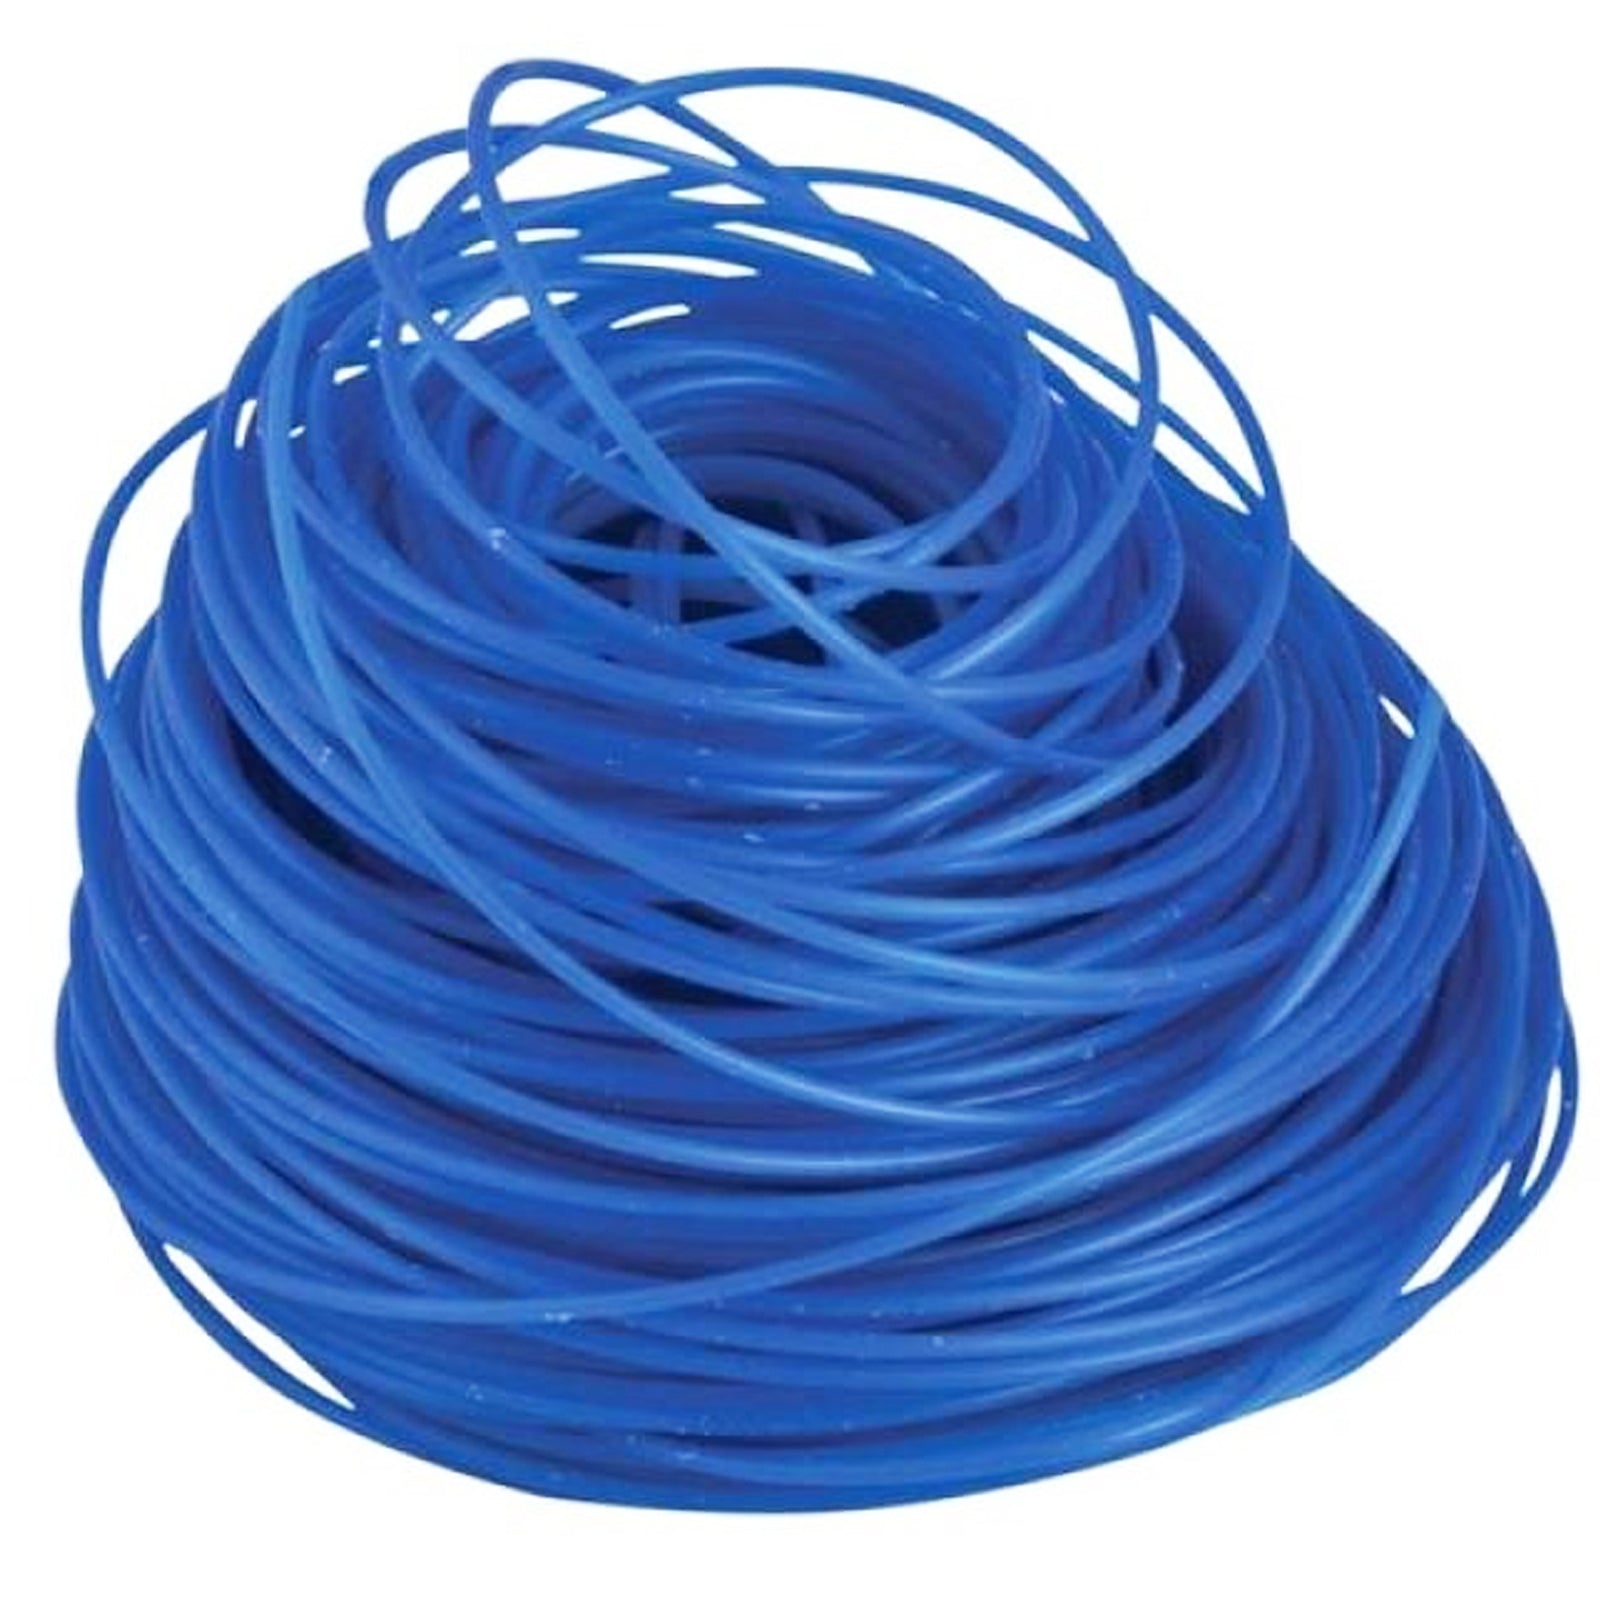 Trimmer Strimmer Line Spool Refill Cord 4 x 30m x 1.5mm Universal Blue Auto-Feed